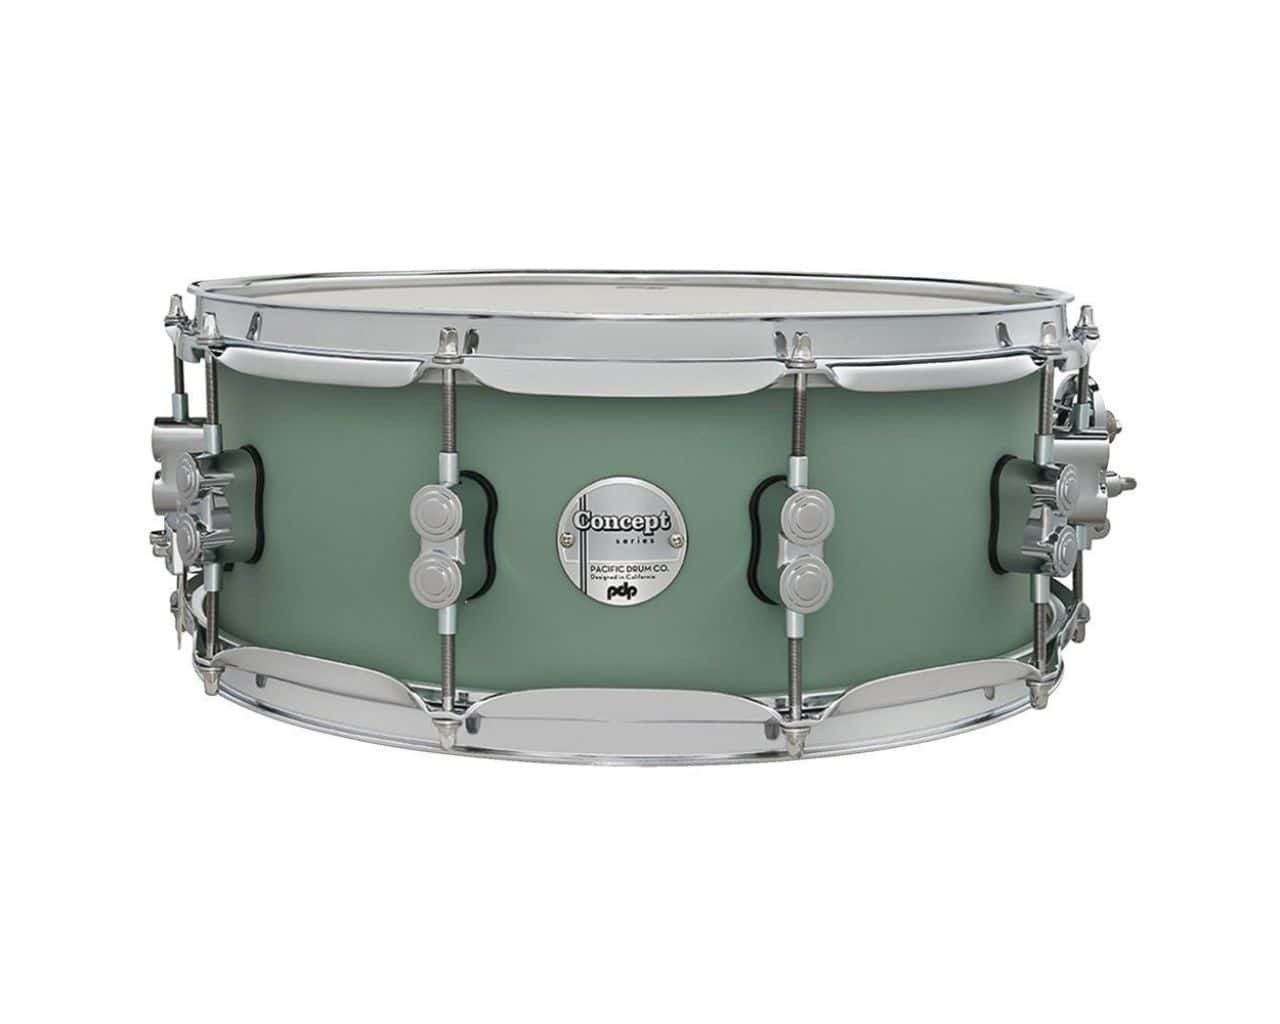 PDP BY DW SNARE DRUM CONCEPT MAPLE FINISH PLY 14 X 5,5